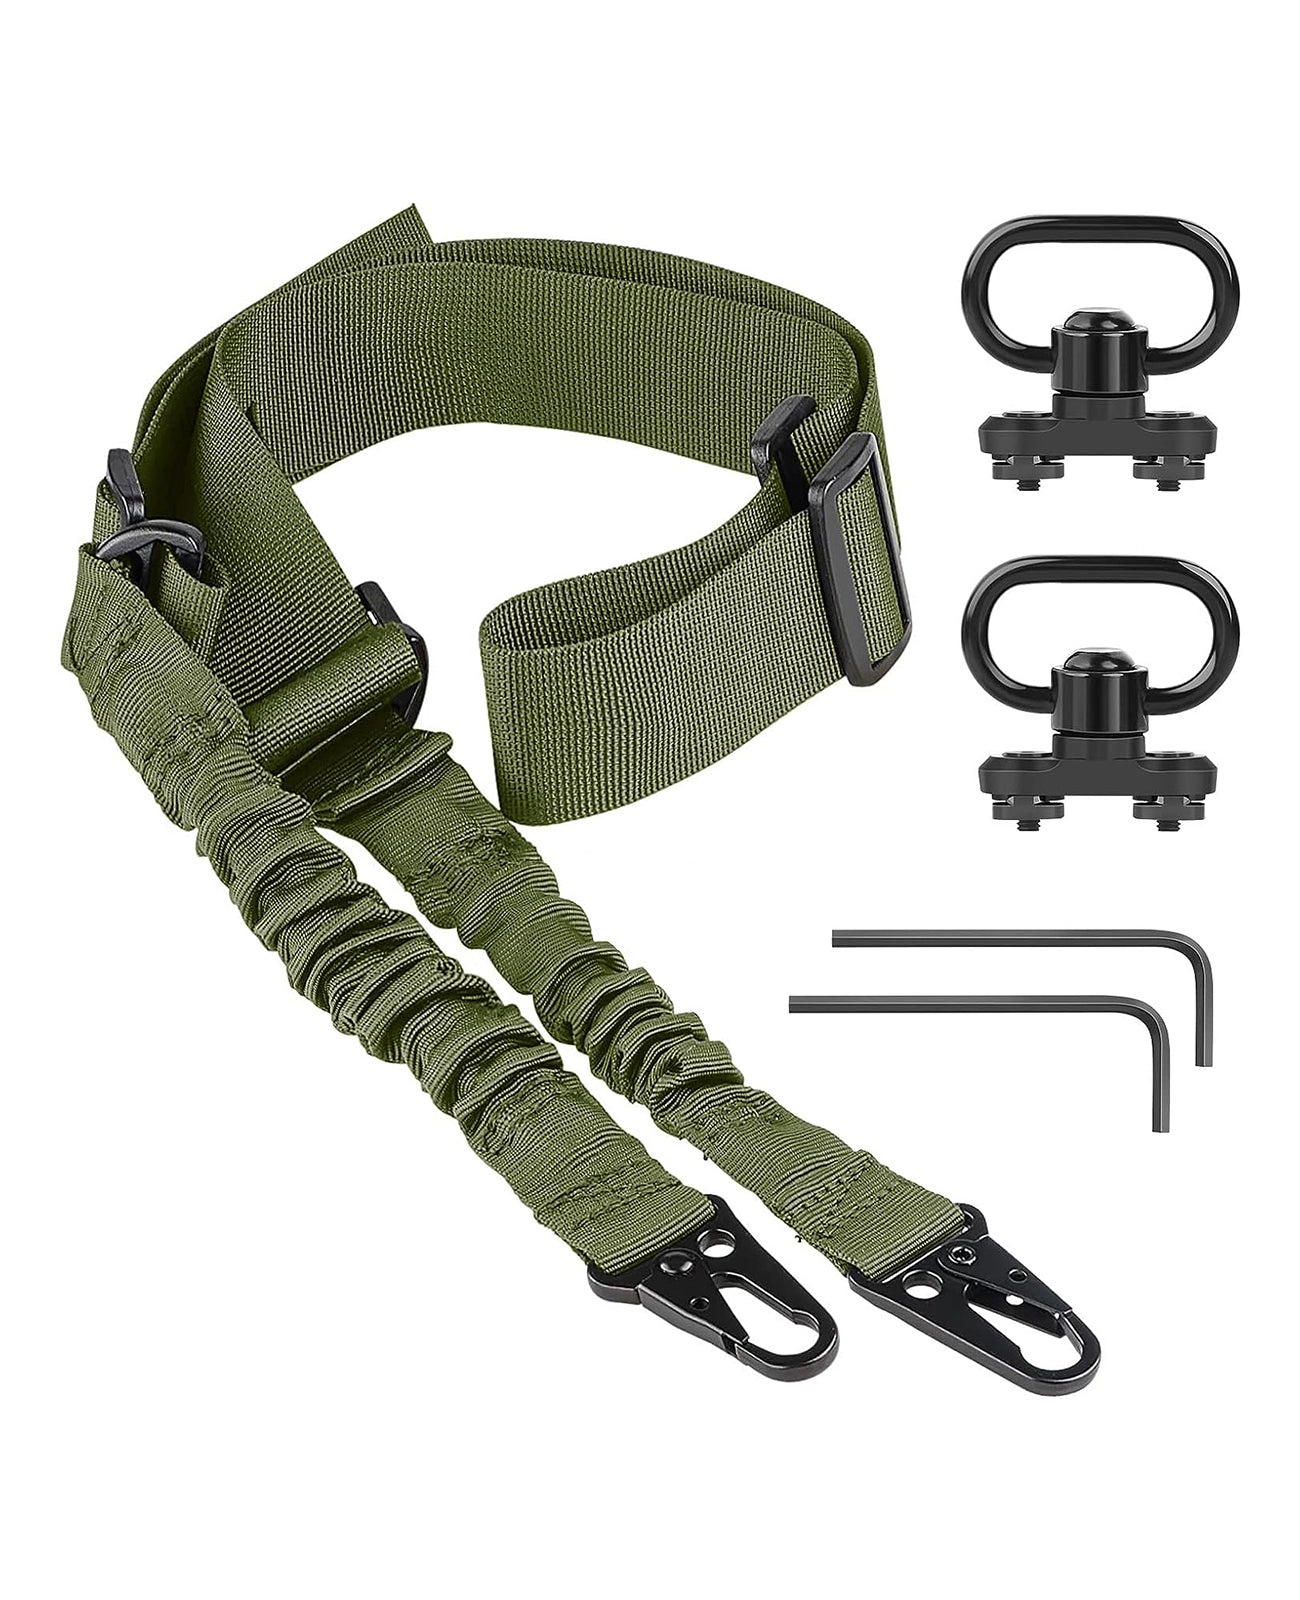 Army Green 2 Point Rifle Sling with Swivels for Hunting